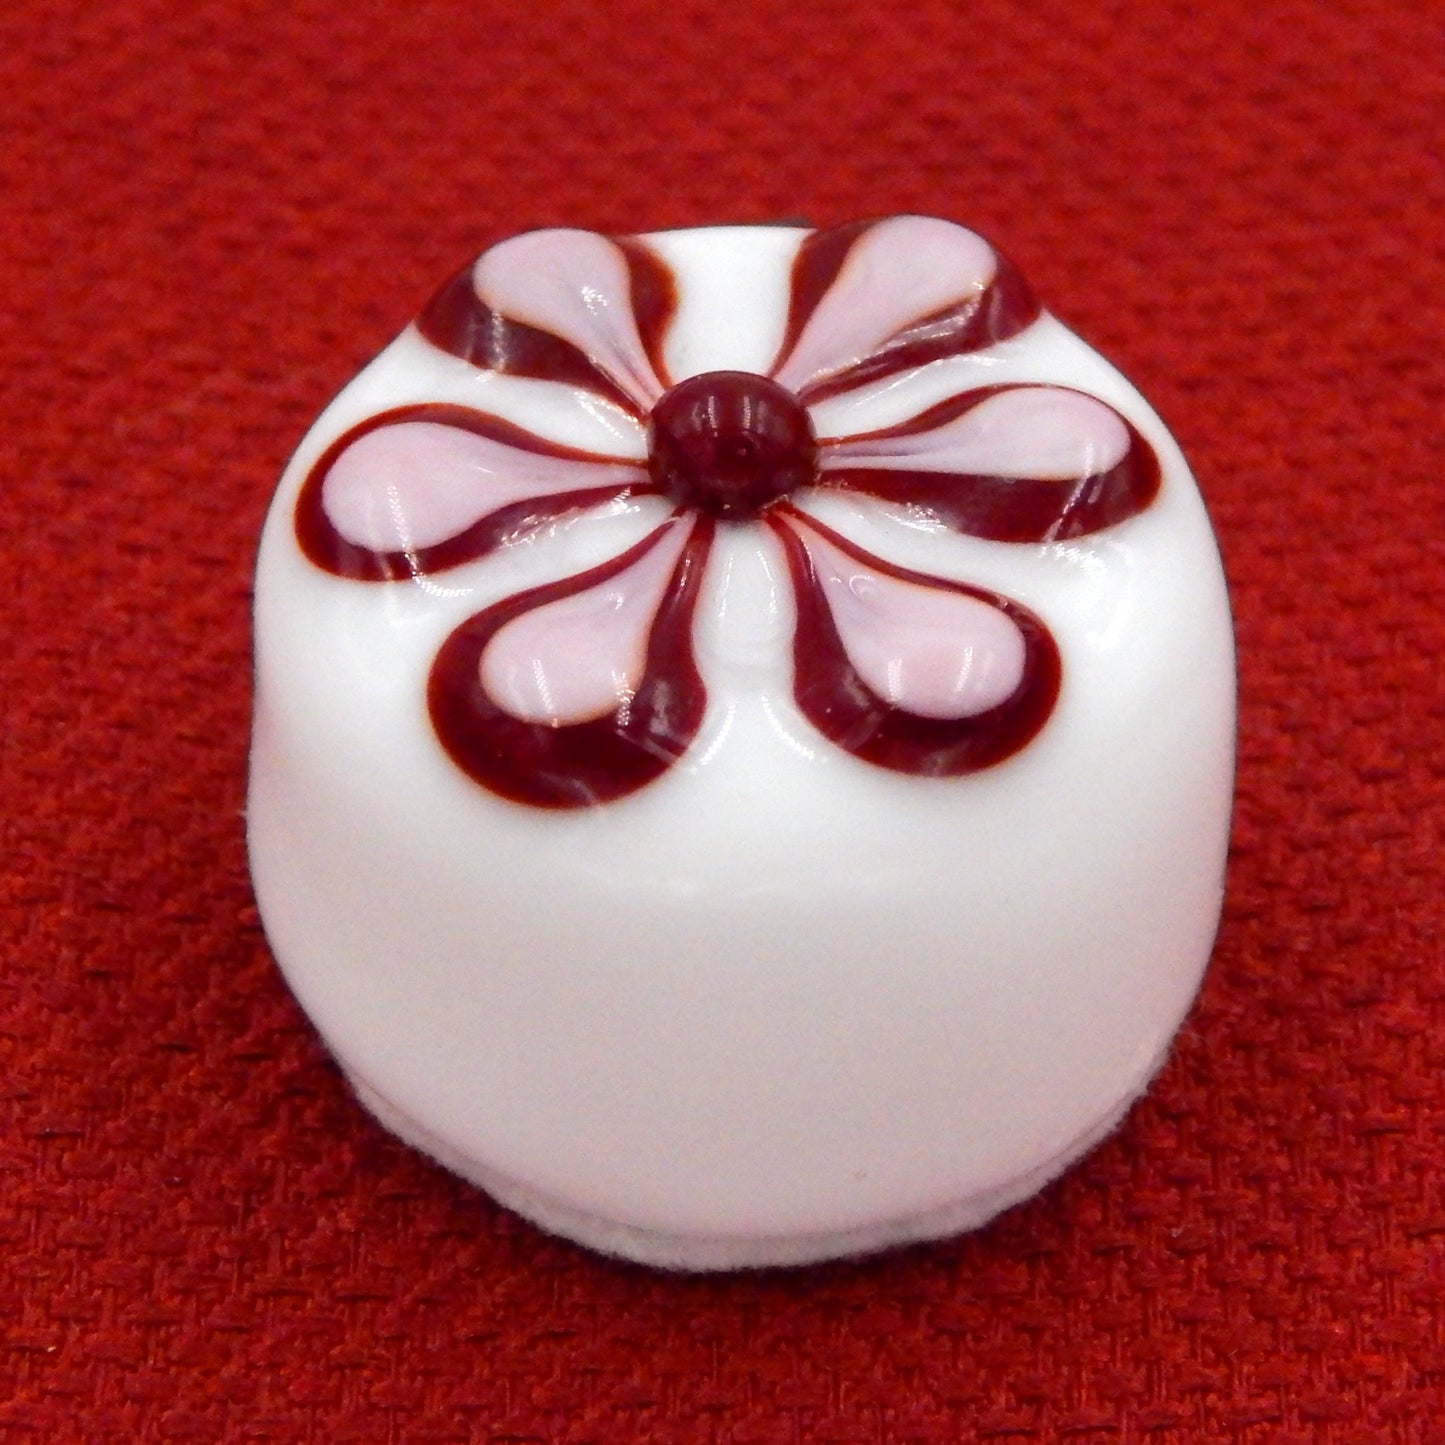 White Chocolate with Pansy Design (15-032WHS)